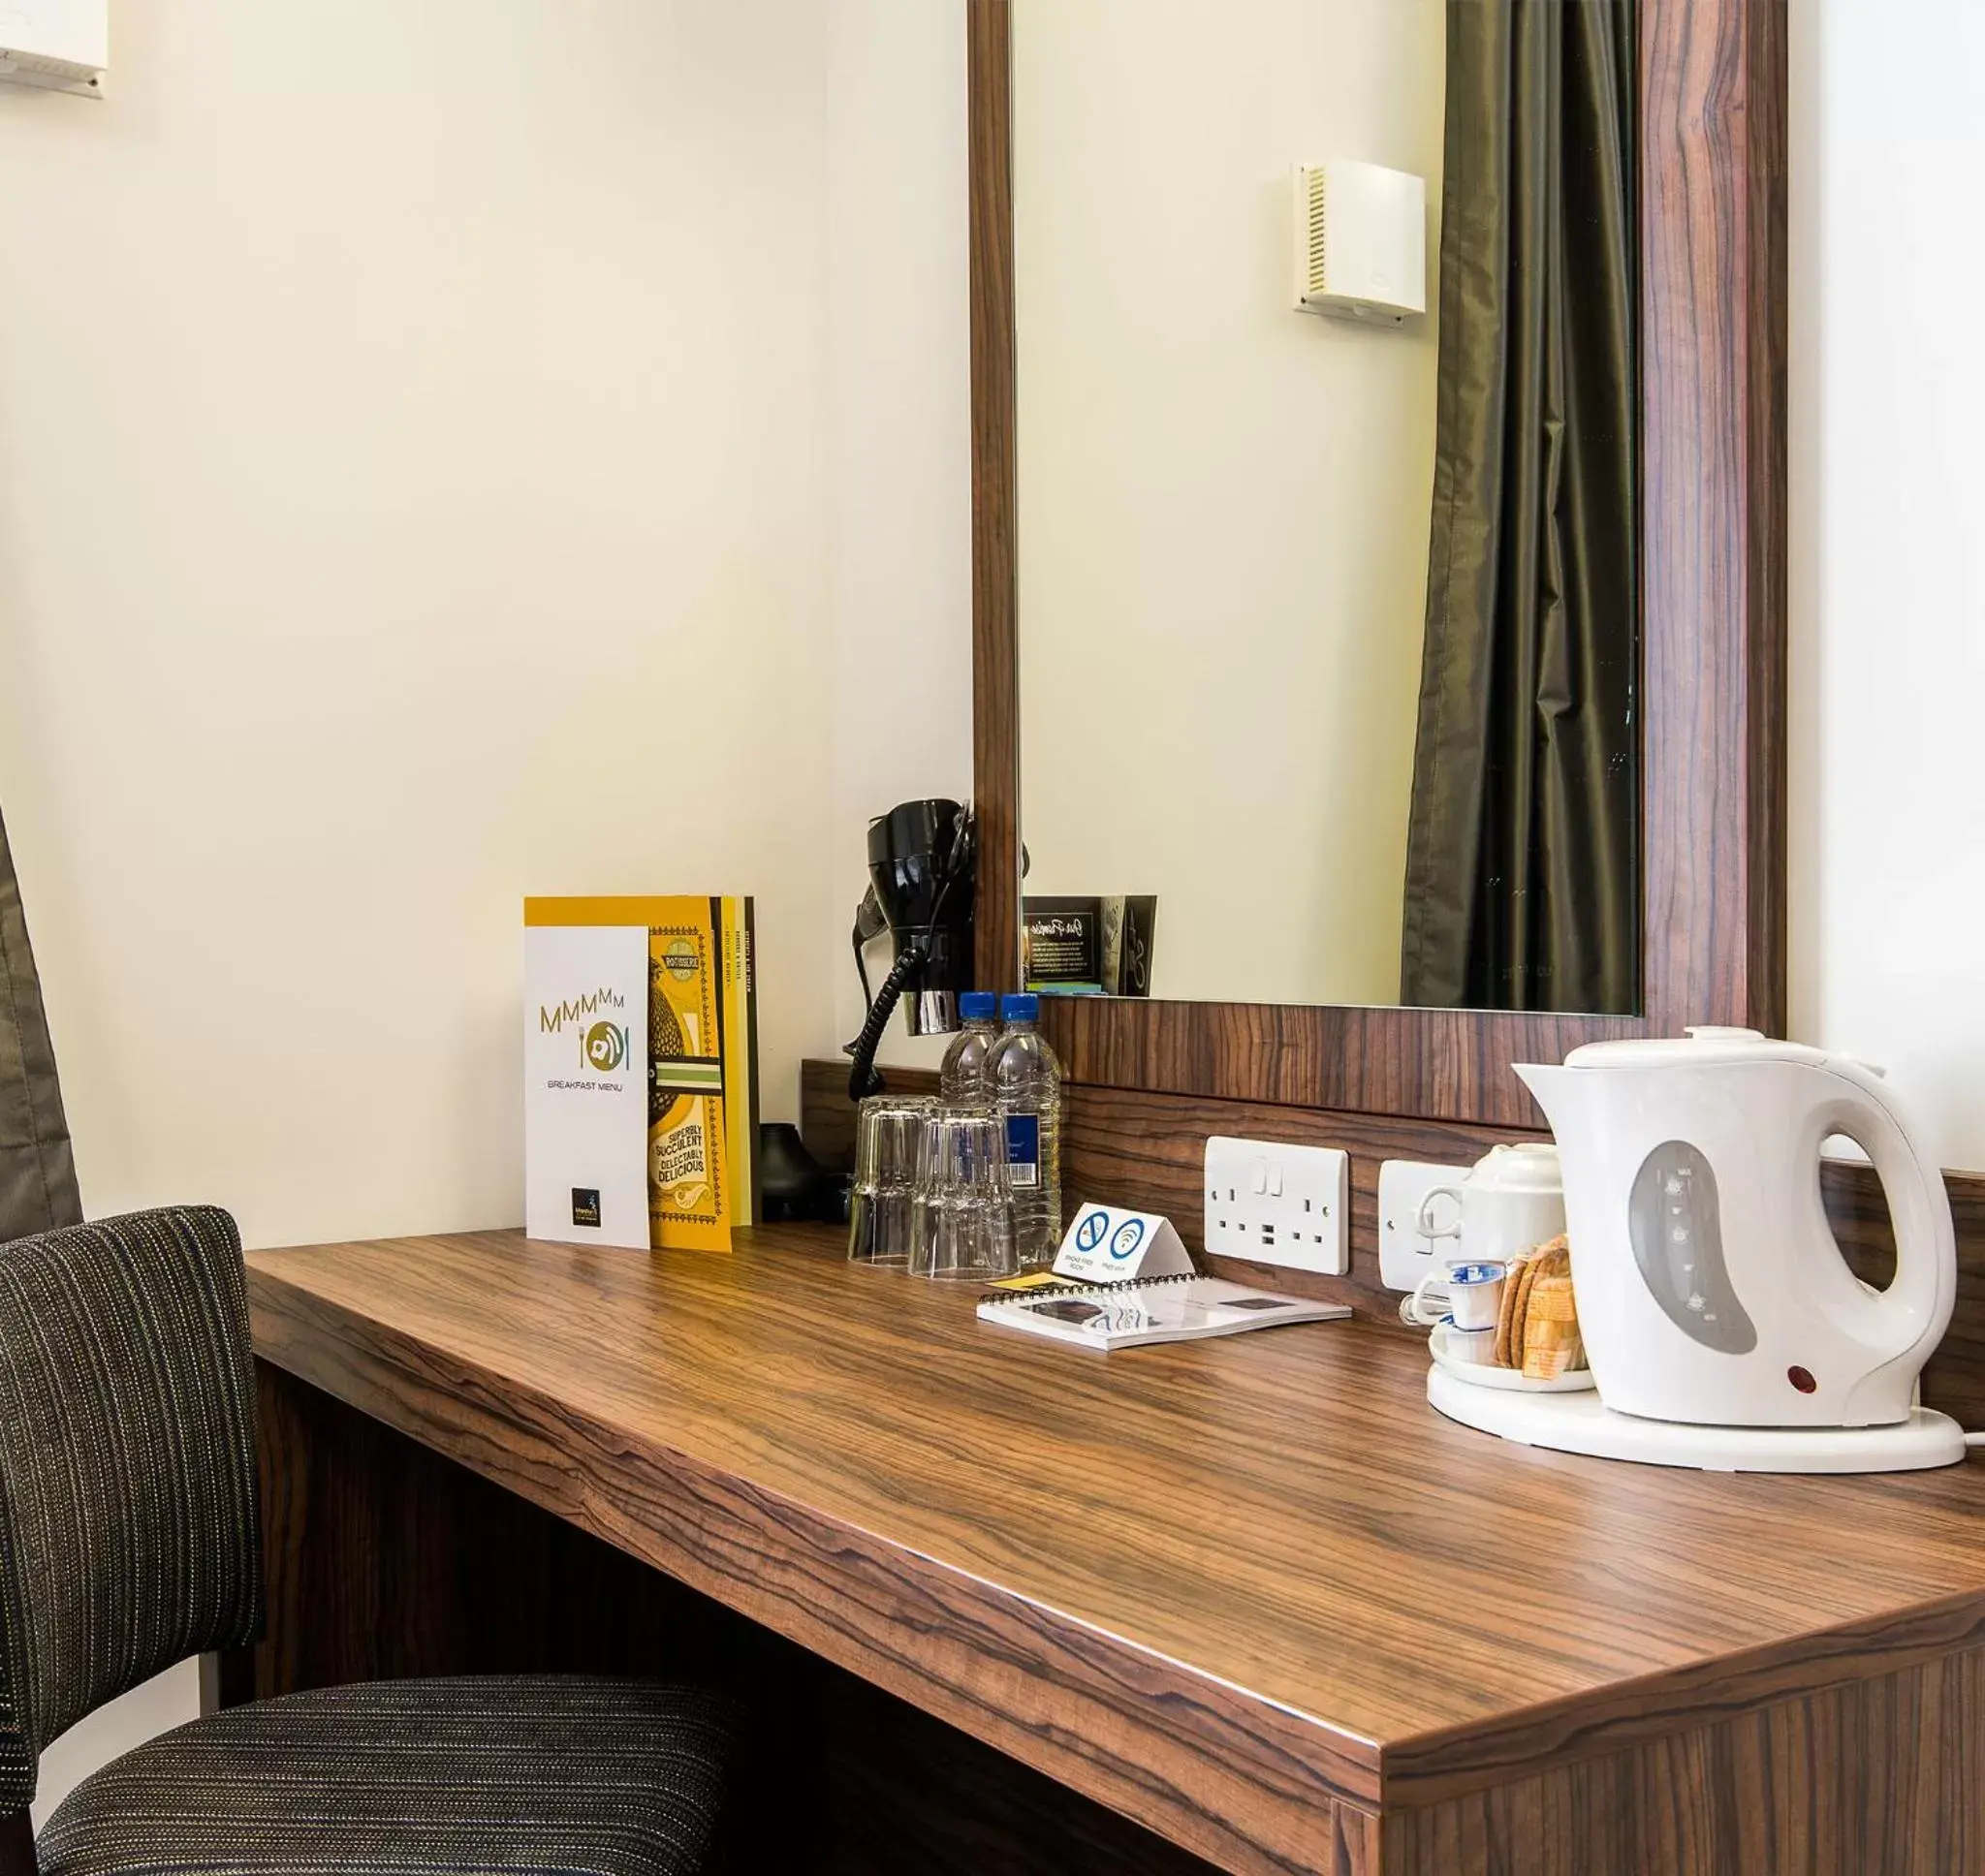 Coffee/tea facilities, TV/Entertainment Center in Highland Gate, Stirling by Marston's Inns